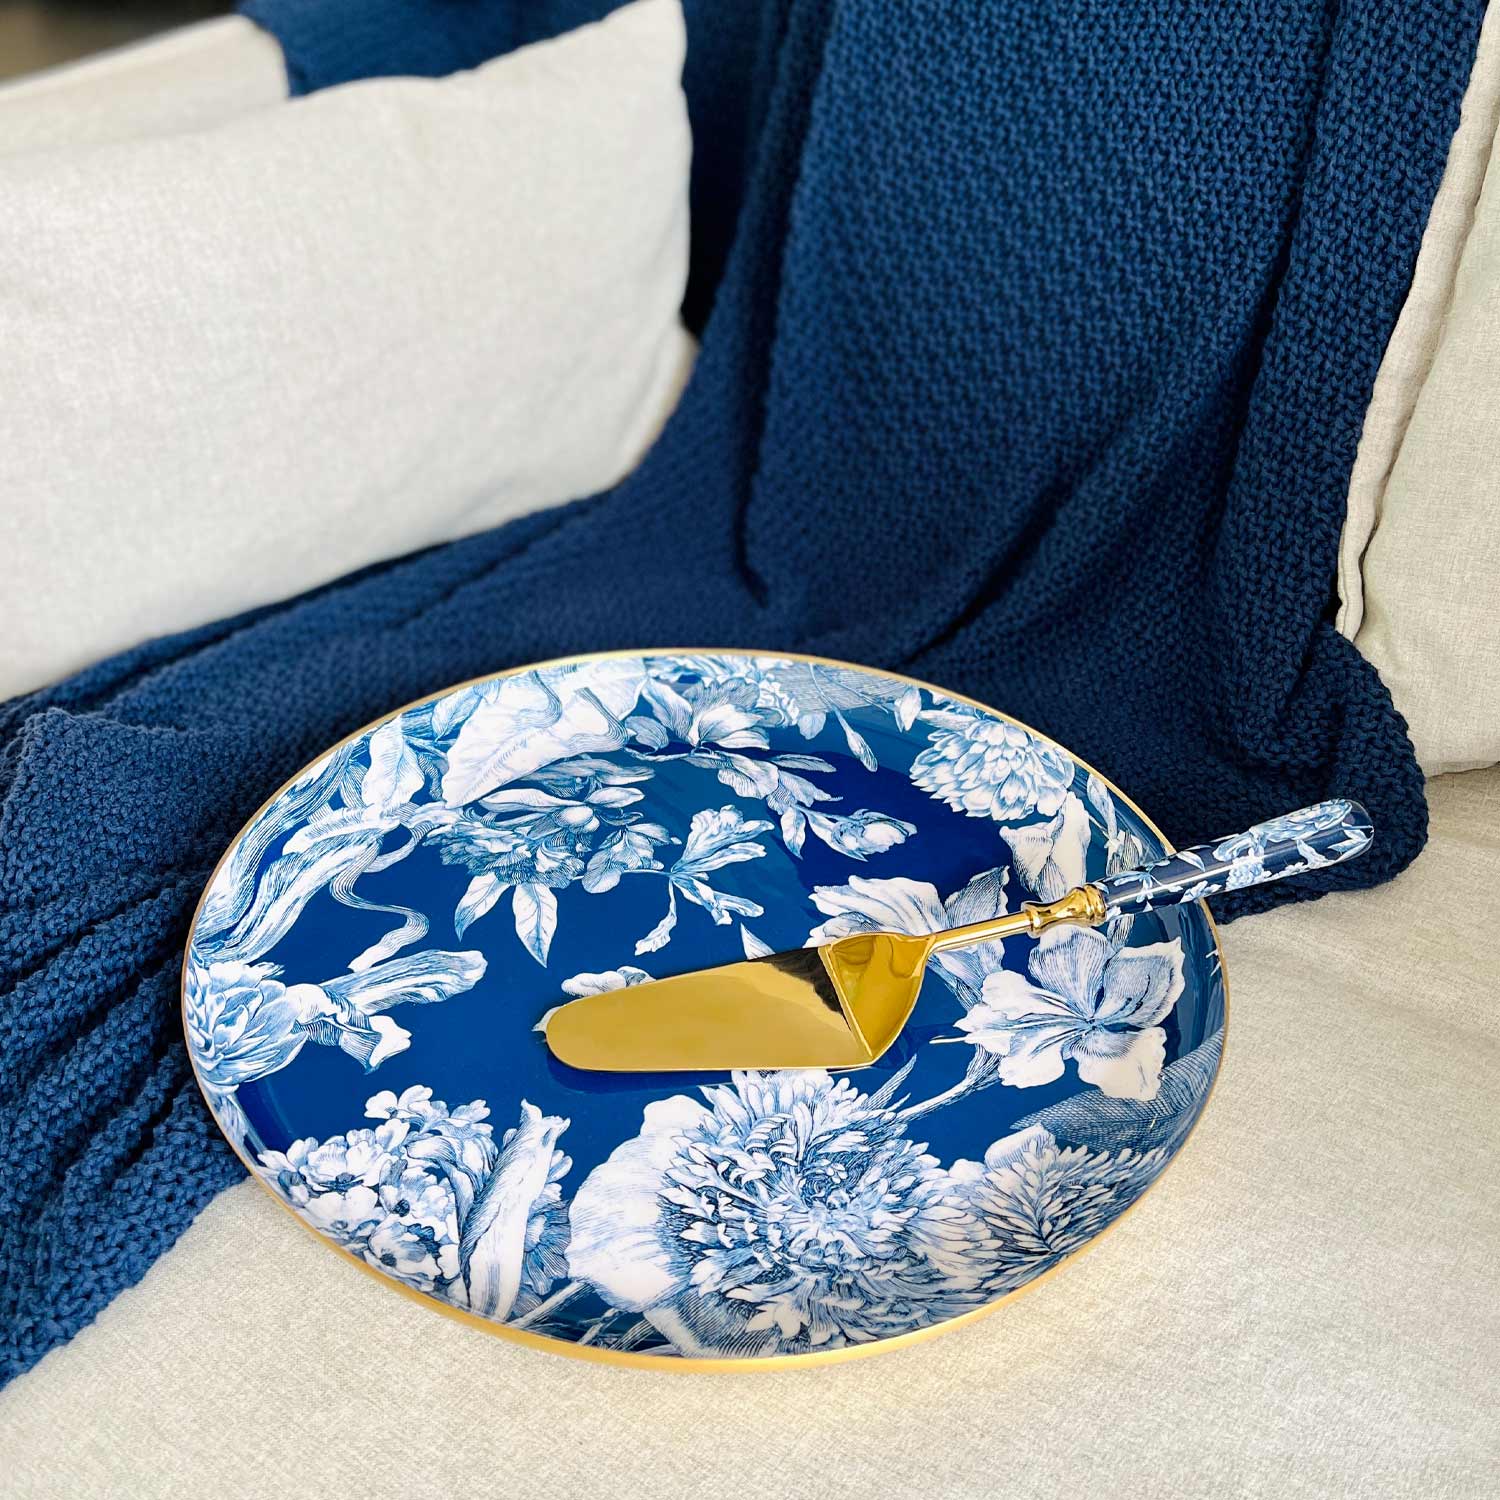 Round Serving Tray - Brittany Bleu